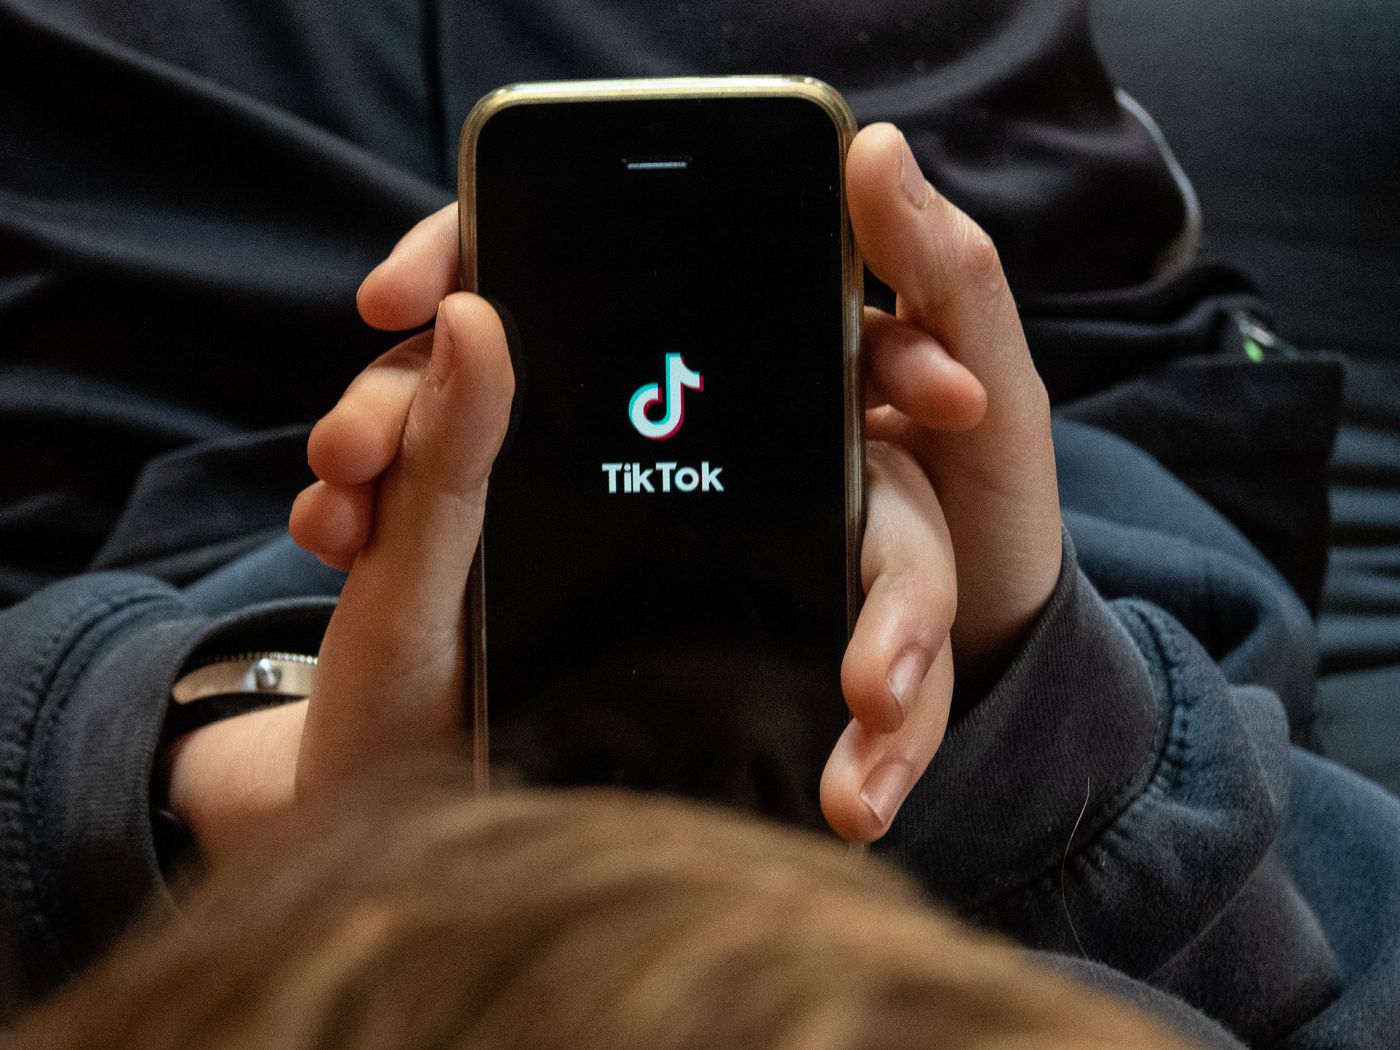 TikTok Could Be Banned Unless China Sells Part; Expert Calls Move 'Unconstitutional' with No Proof